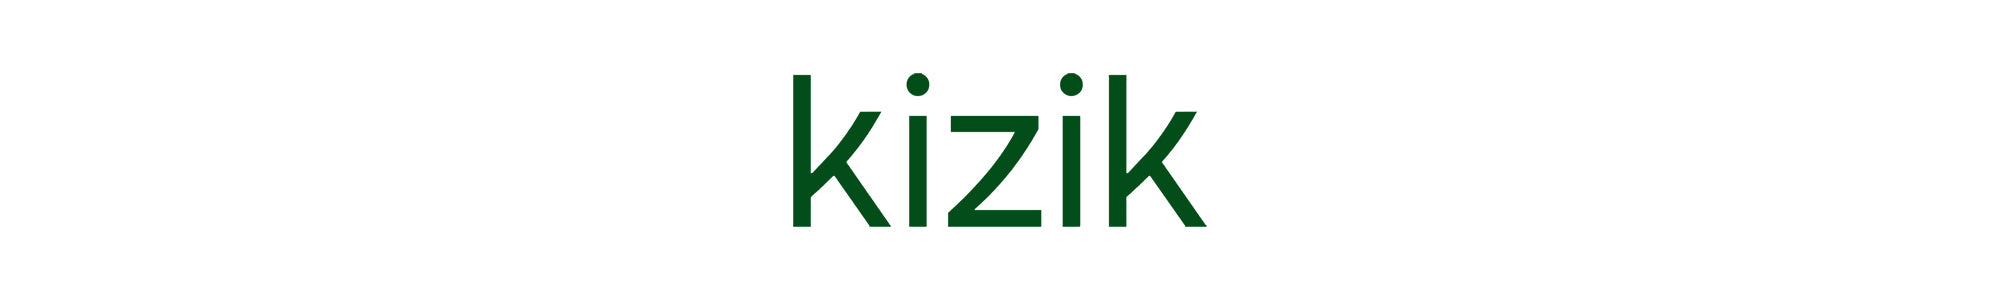 Green text spelling "kizik" in a modern, lowercase font on a white background.